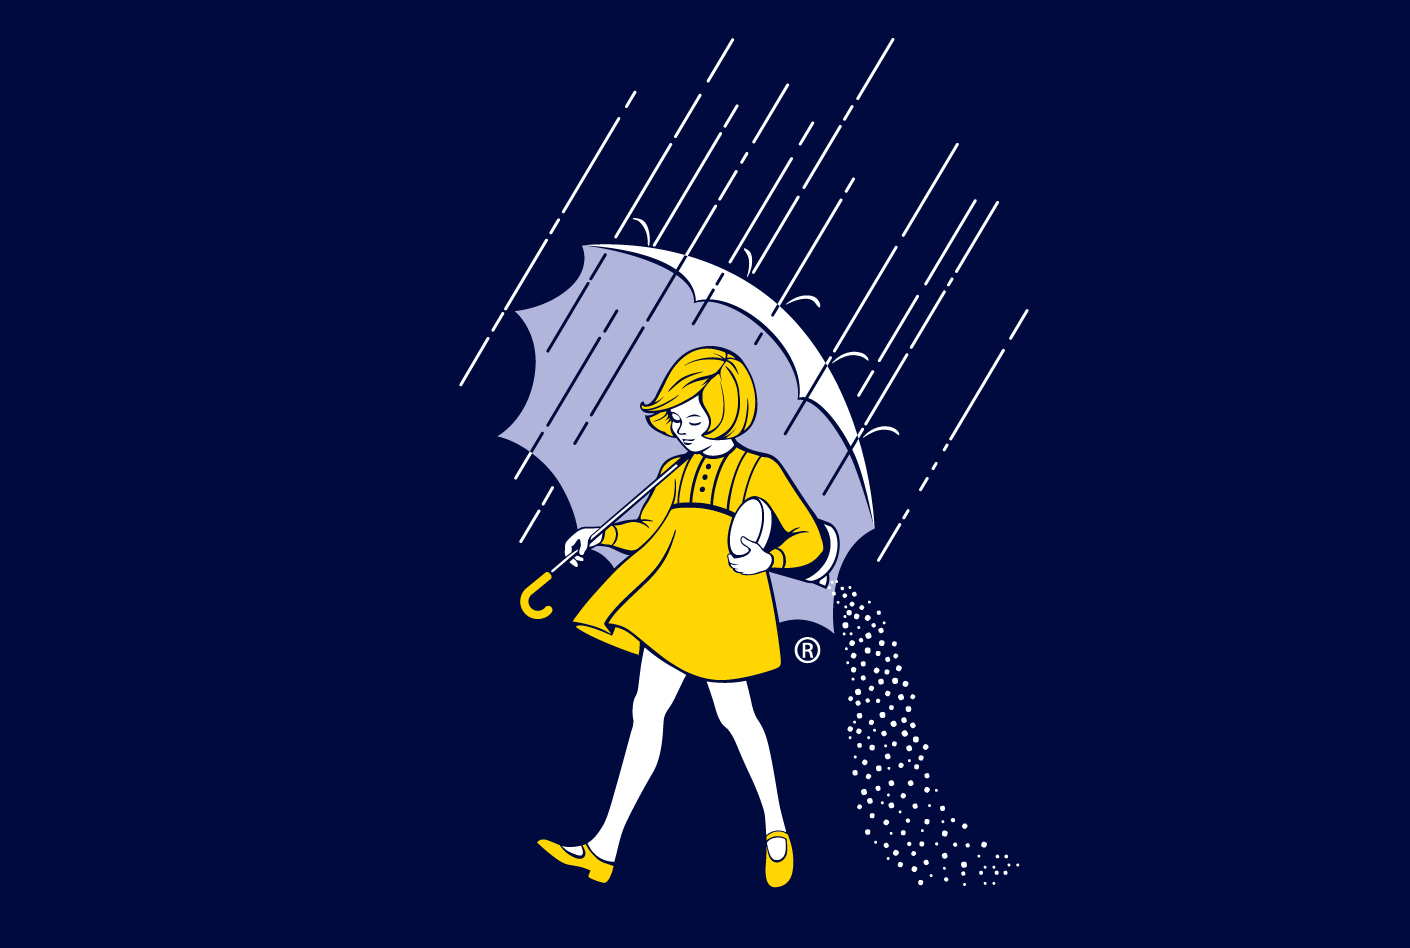 Morton Salt Girl Can Make Advertising Industry History as First